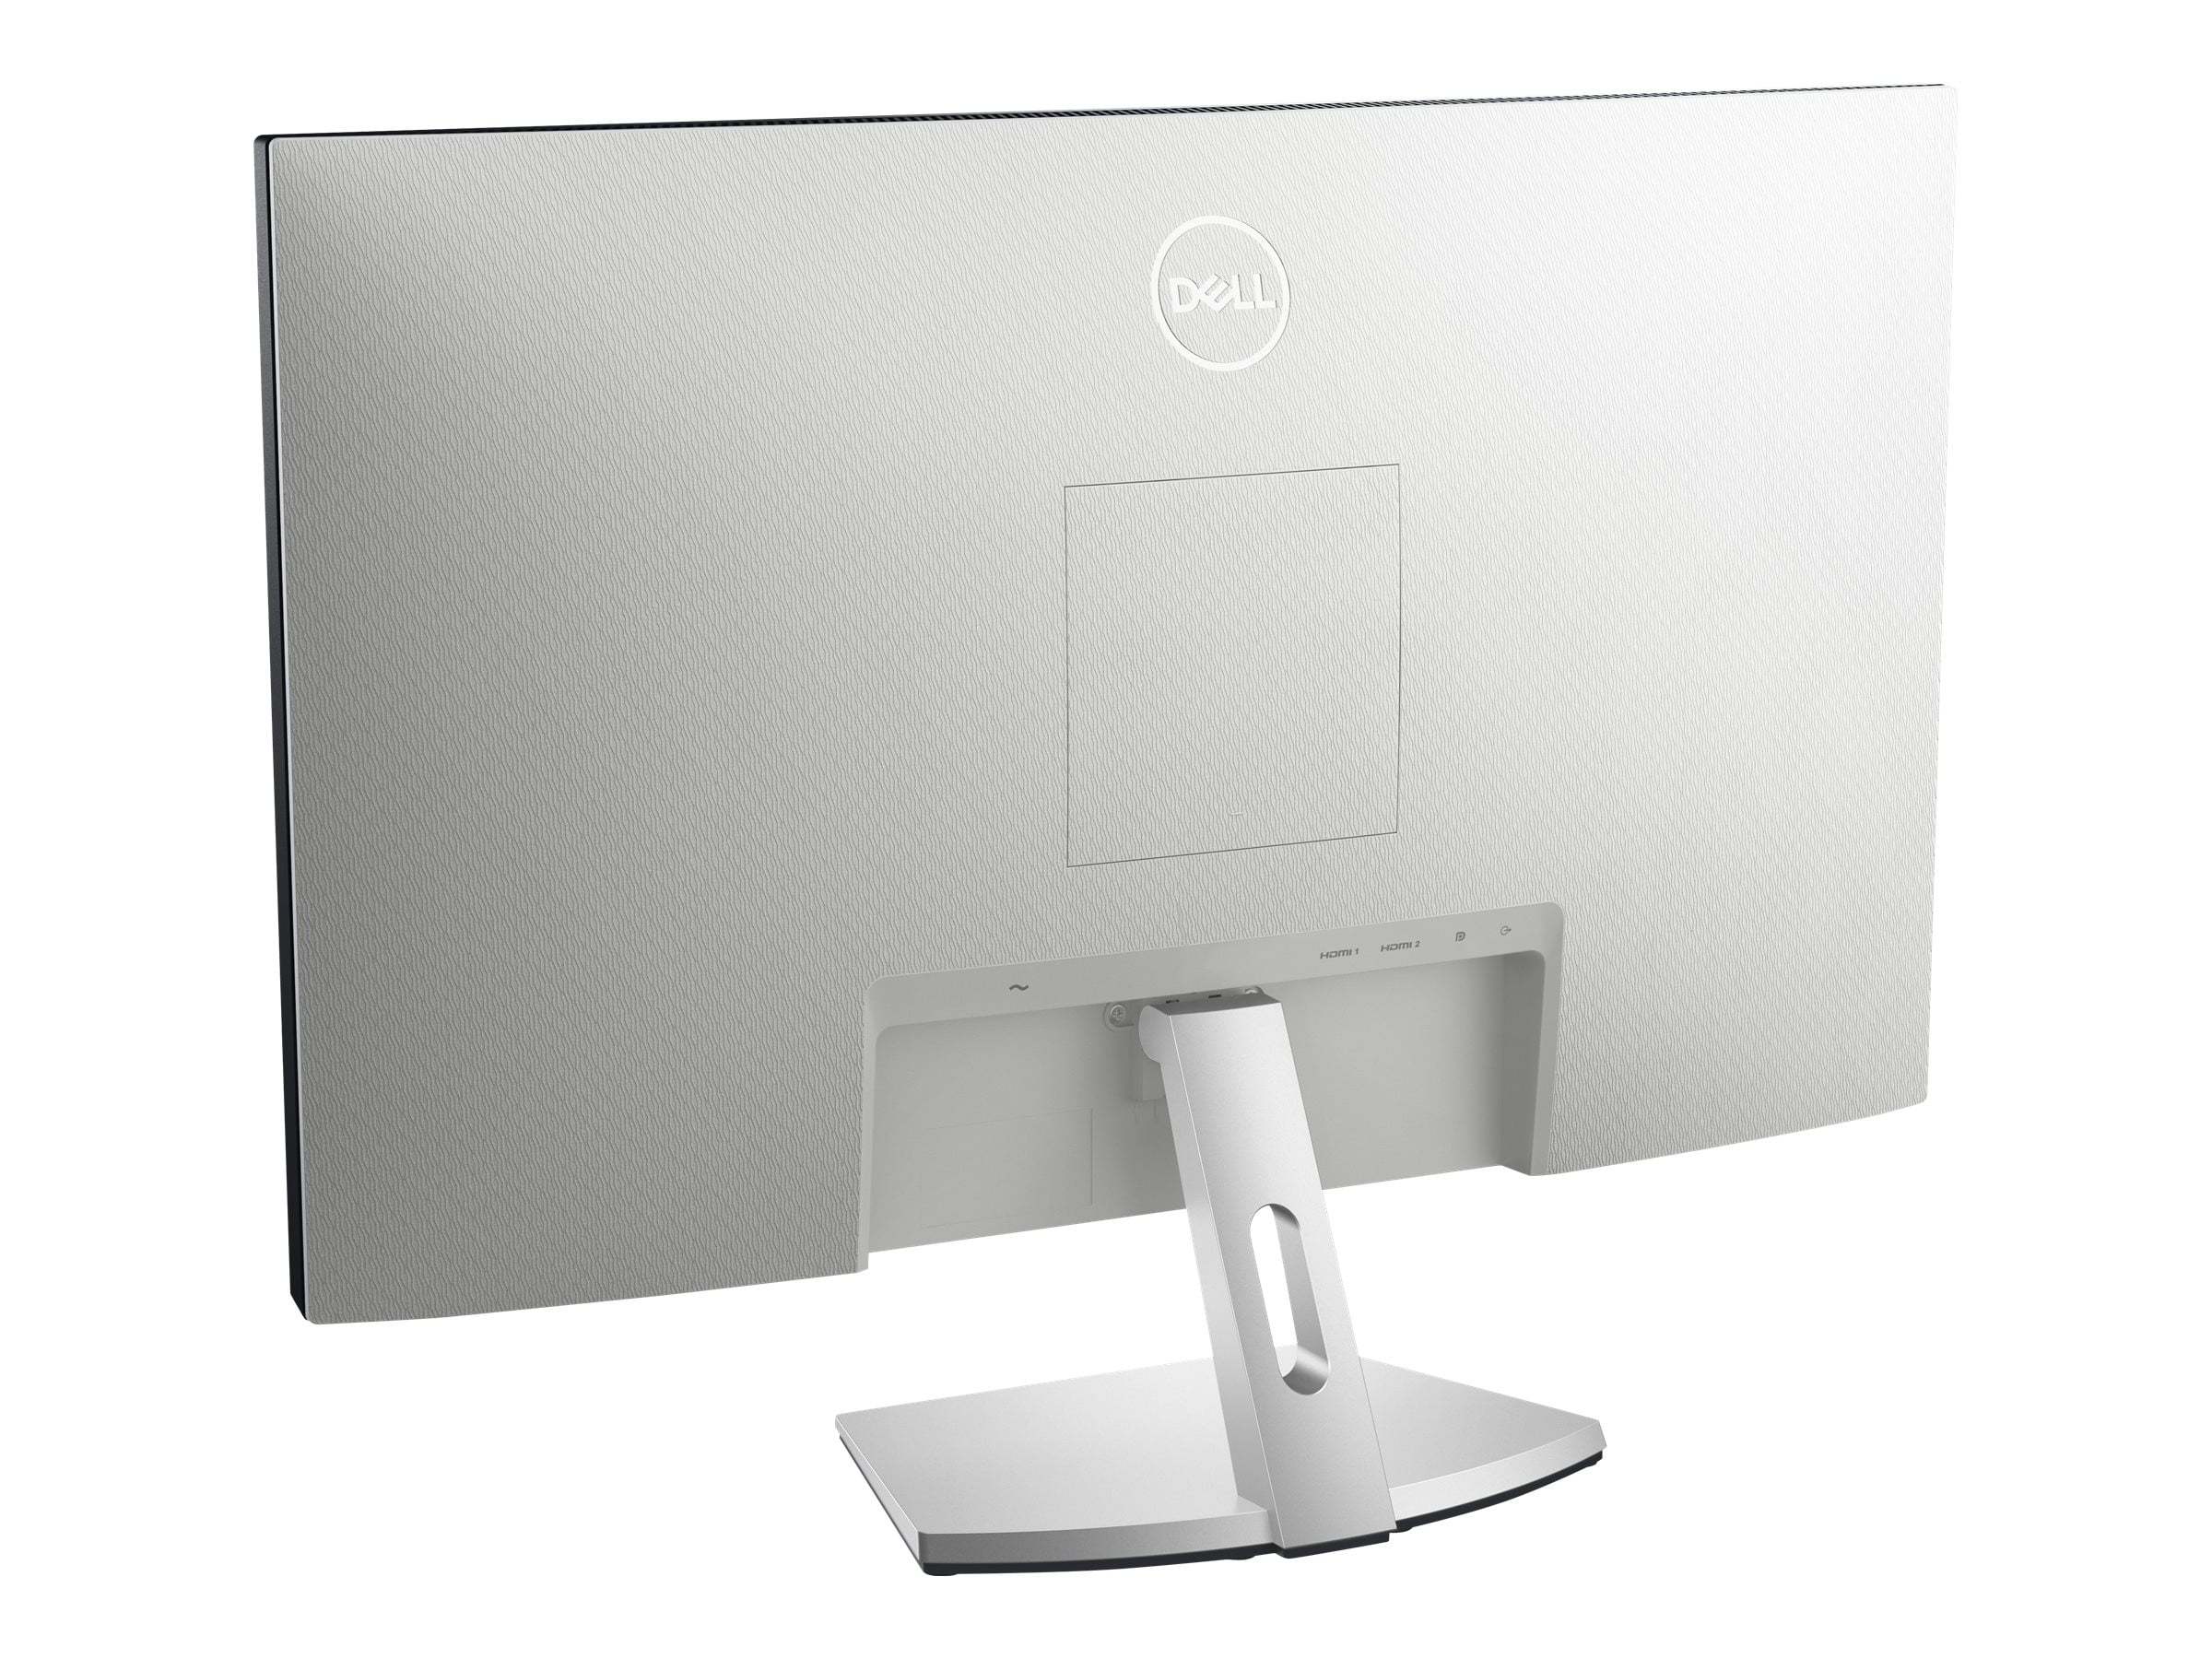 Dell S2721D - LED monitor - 27